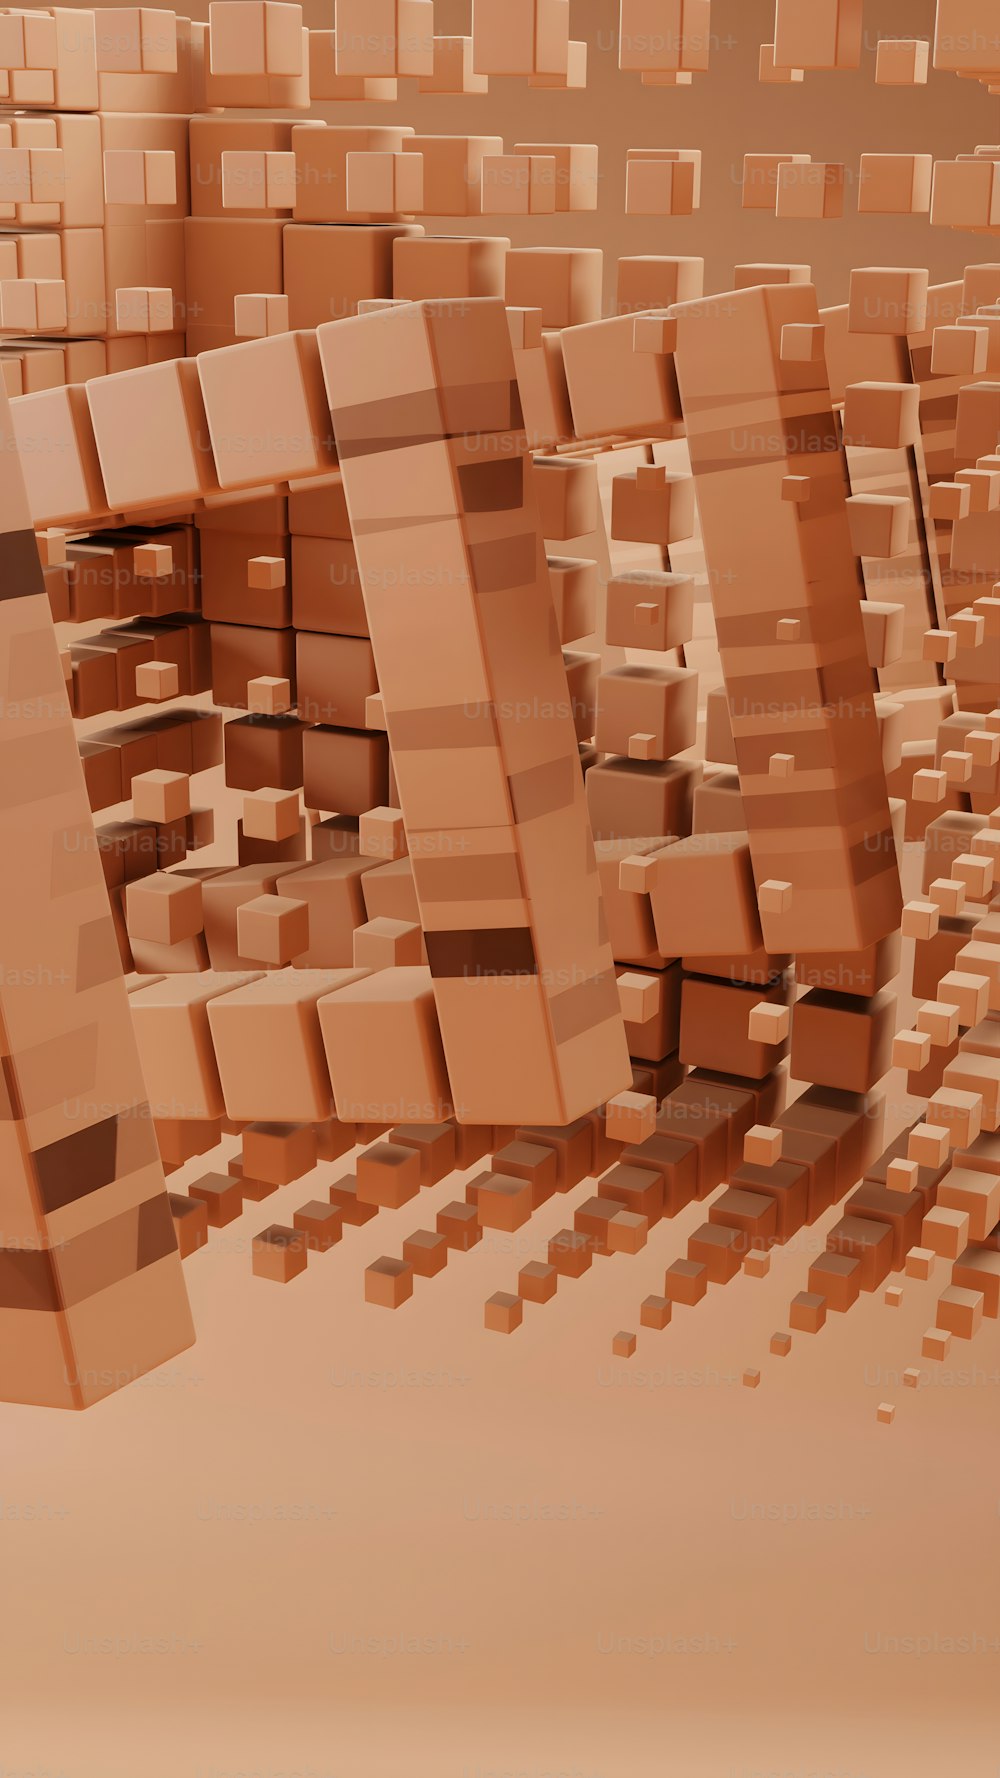 an abstract image of a group of cubes